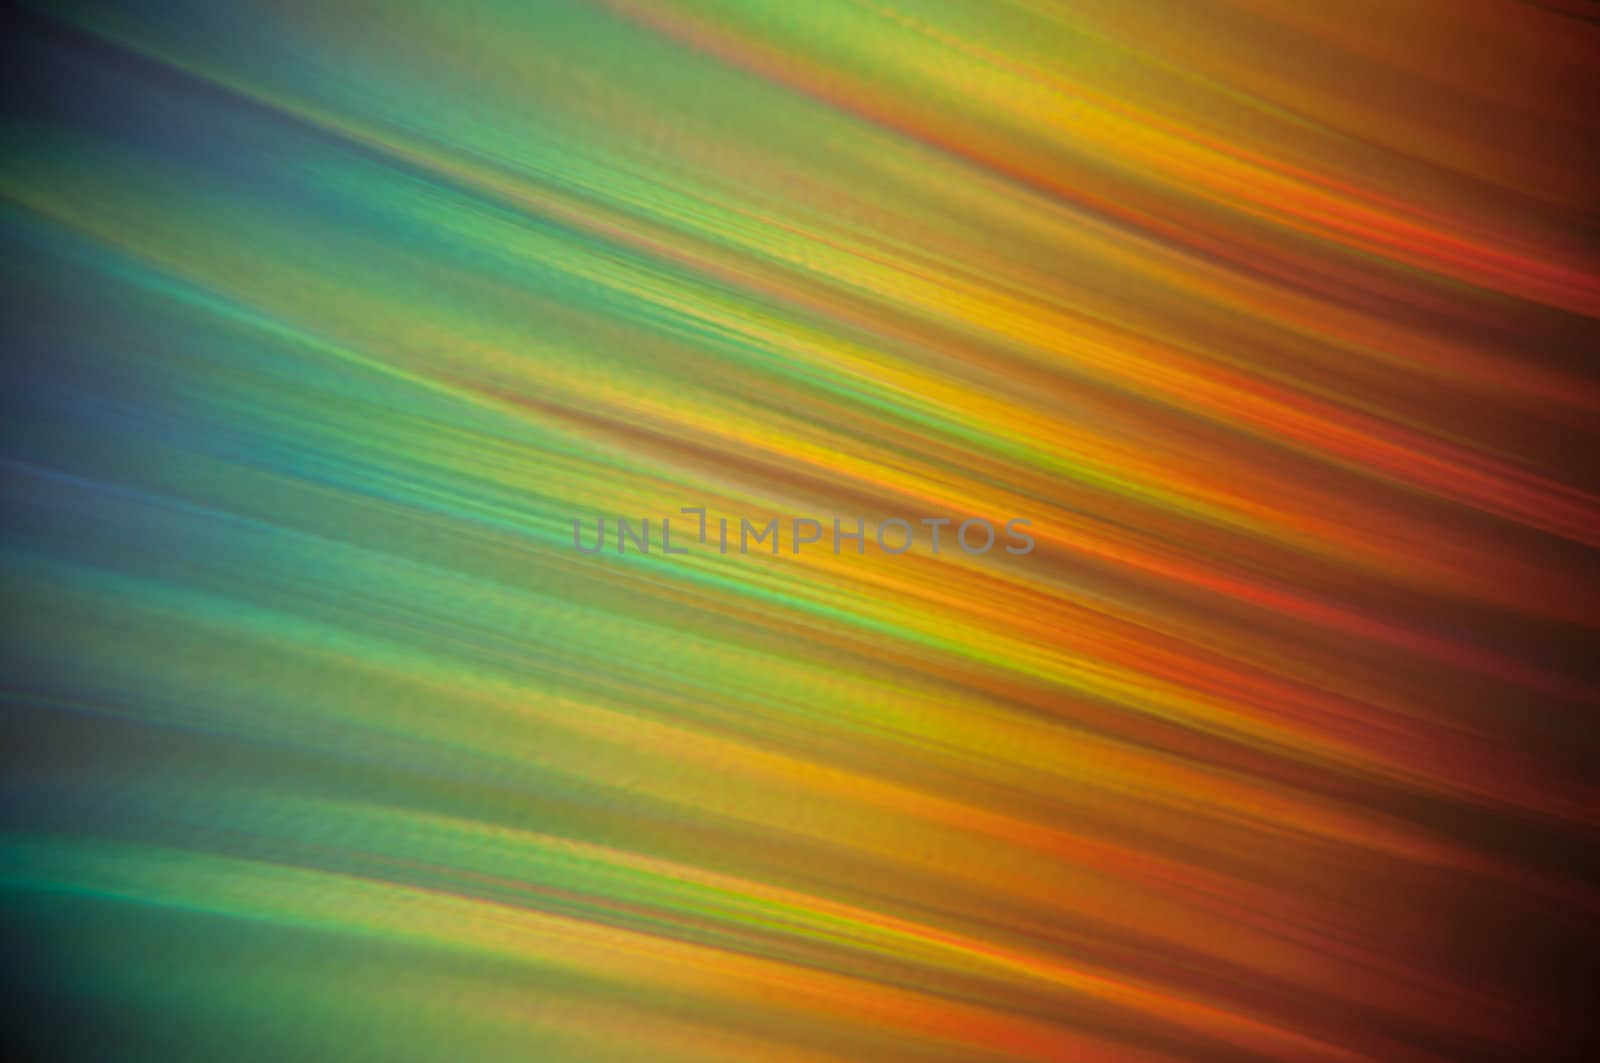 Background, a rainbow of colored horizontal stripes.
